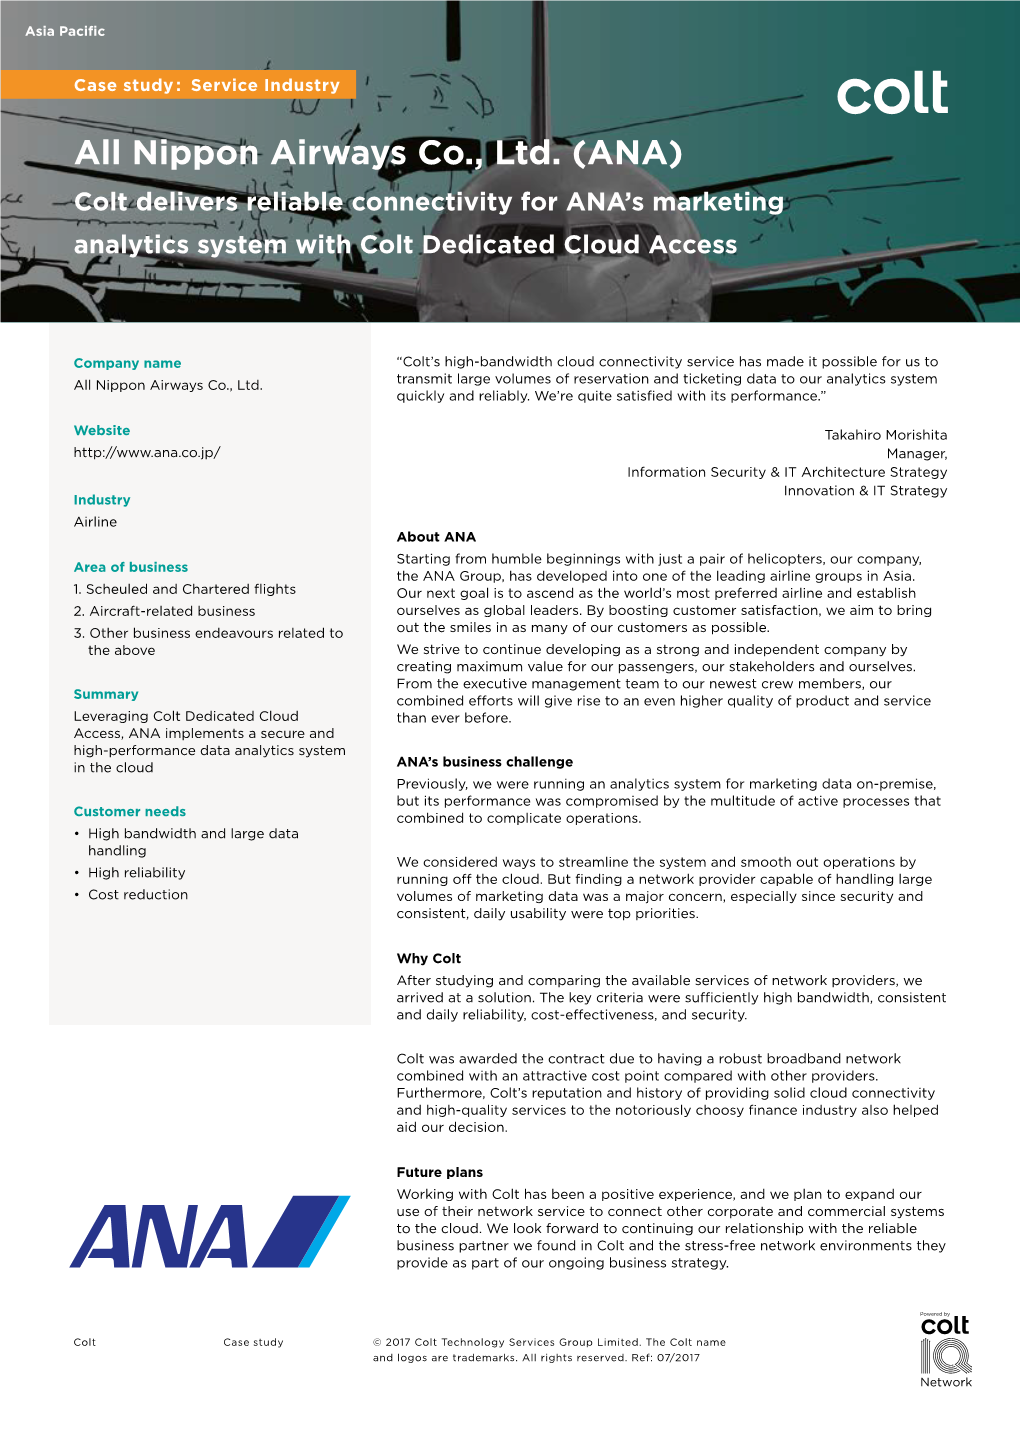 All Nippon Airways Co., Ltd. (ANA) Colt Delivers Reliable Connectivity for ANA’S Marketing Analytics System with Colt Dedicated Cloud Access